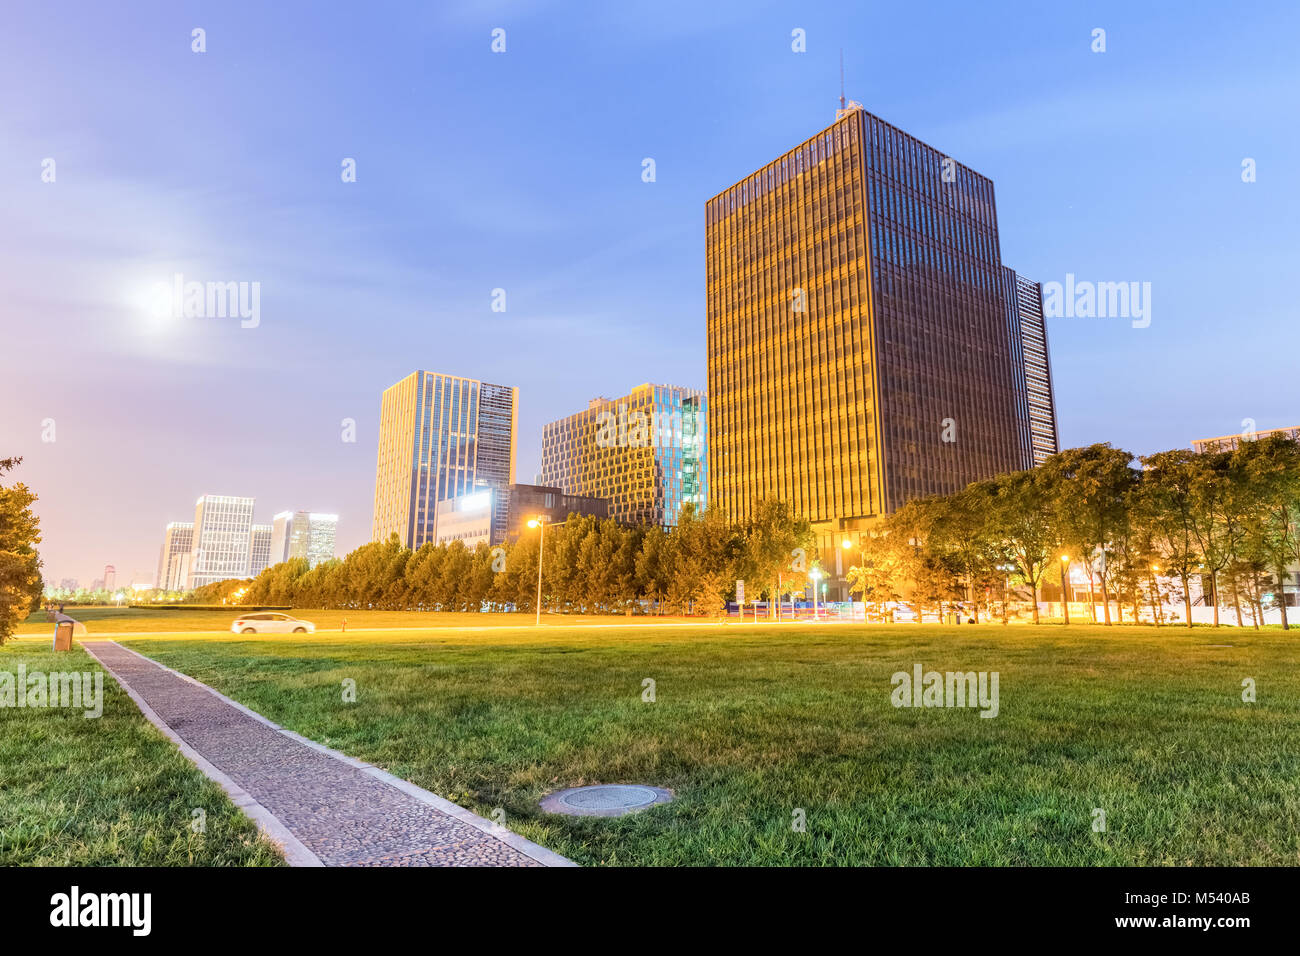 park footpath and lawn with modern buildings at night Stock Photo